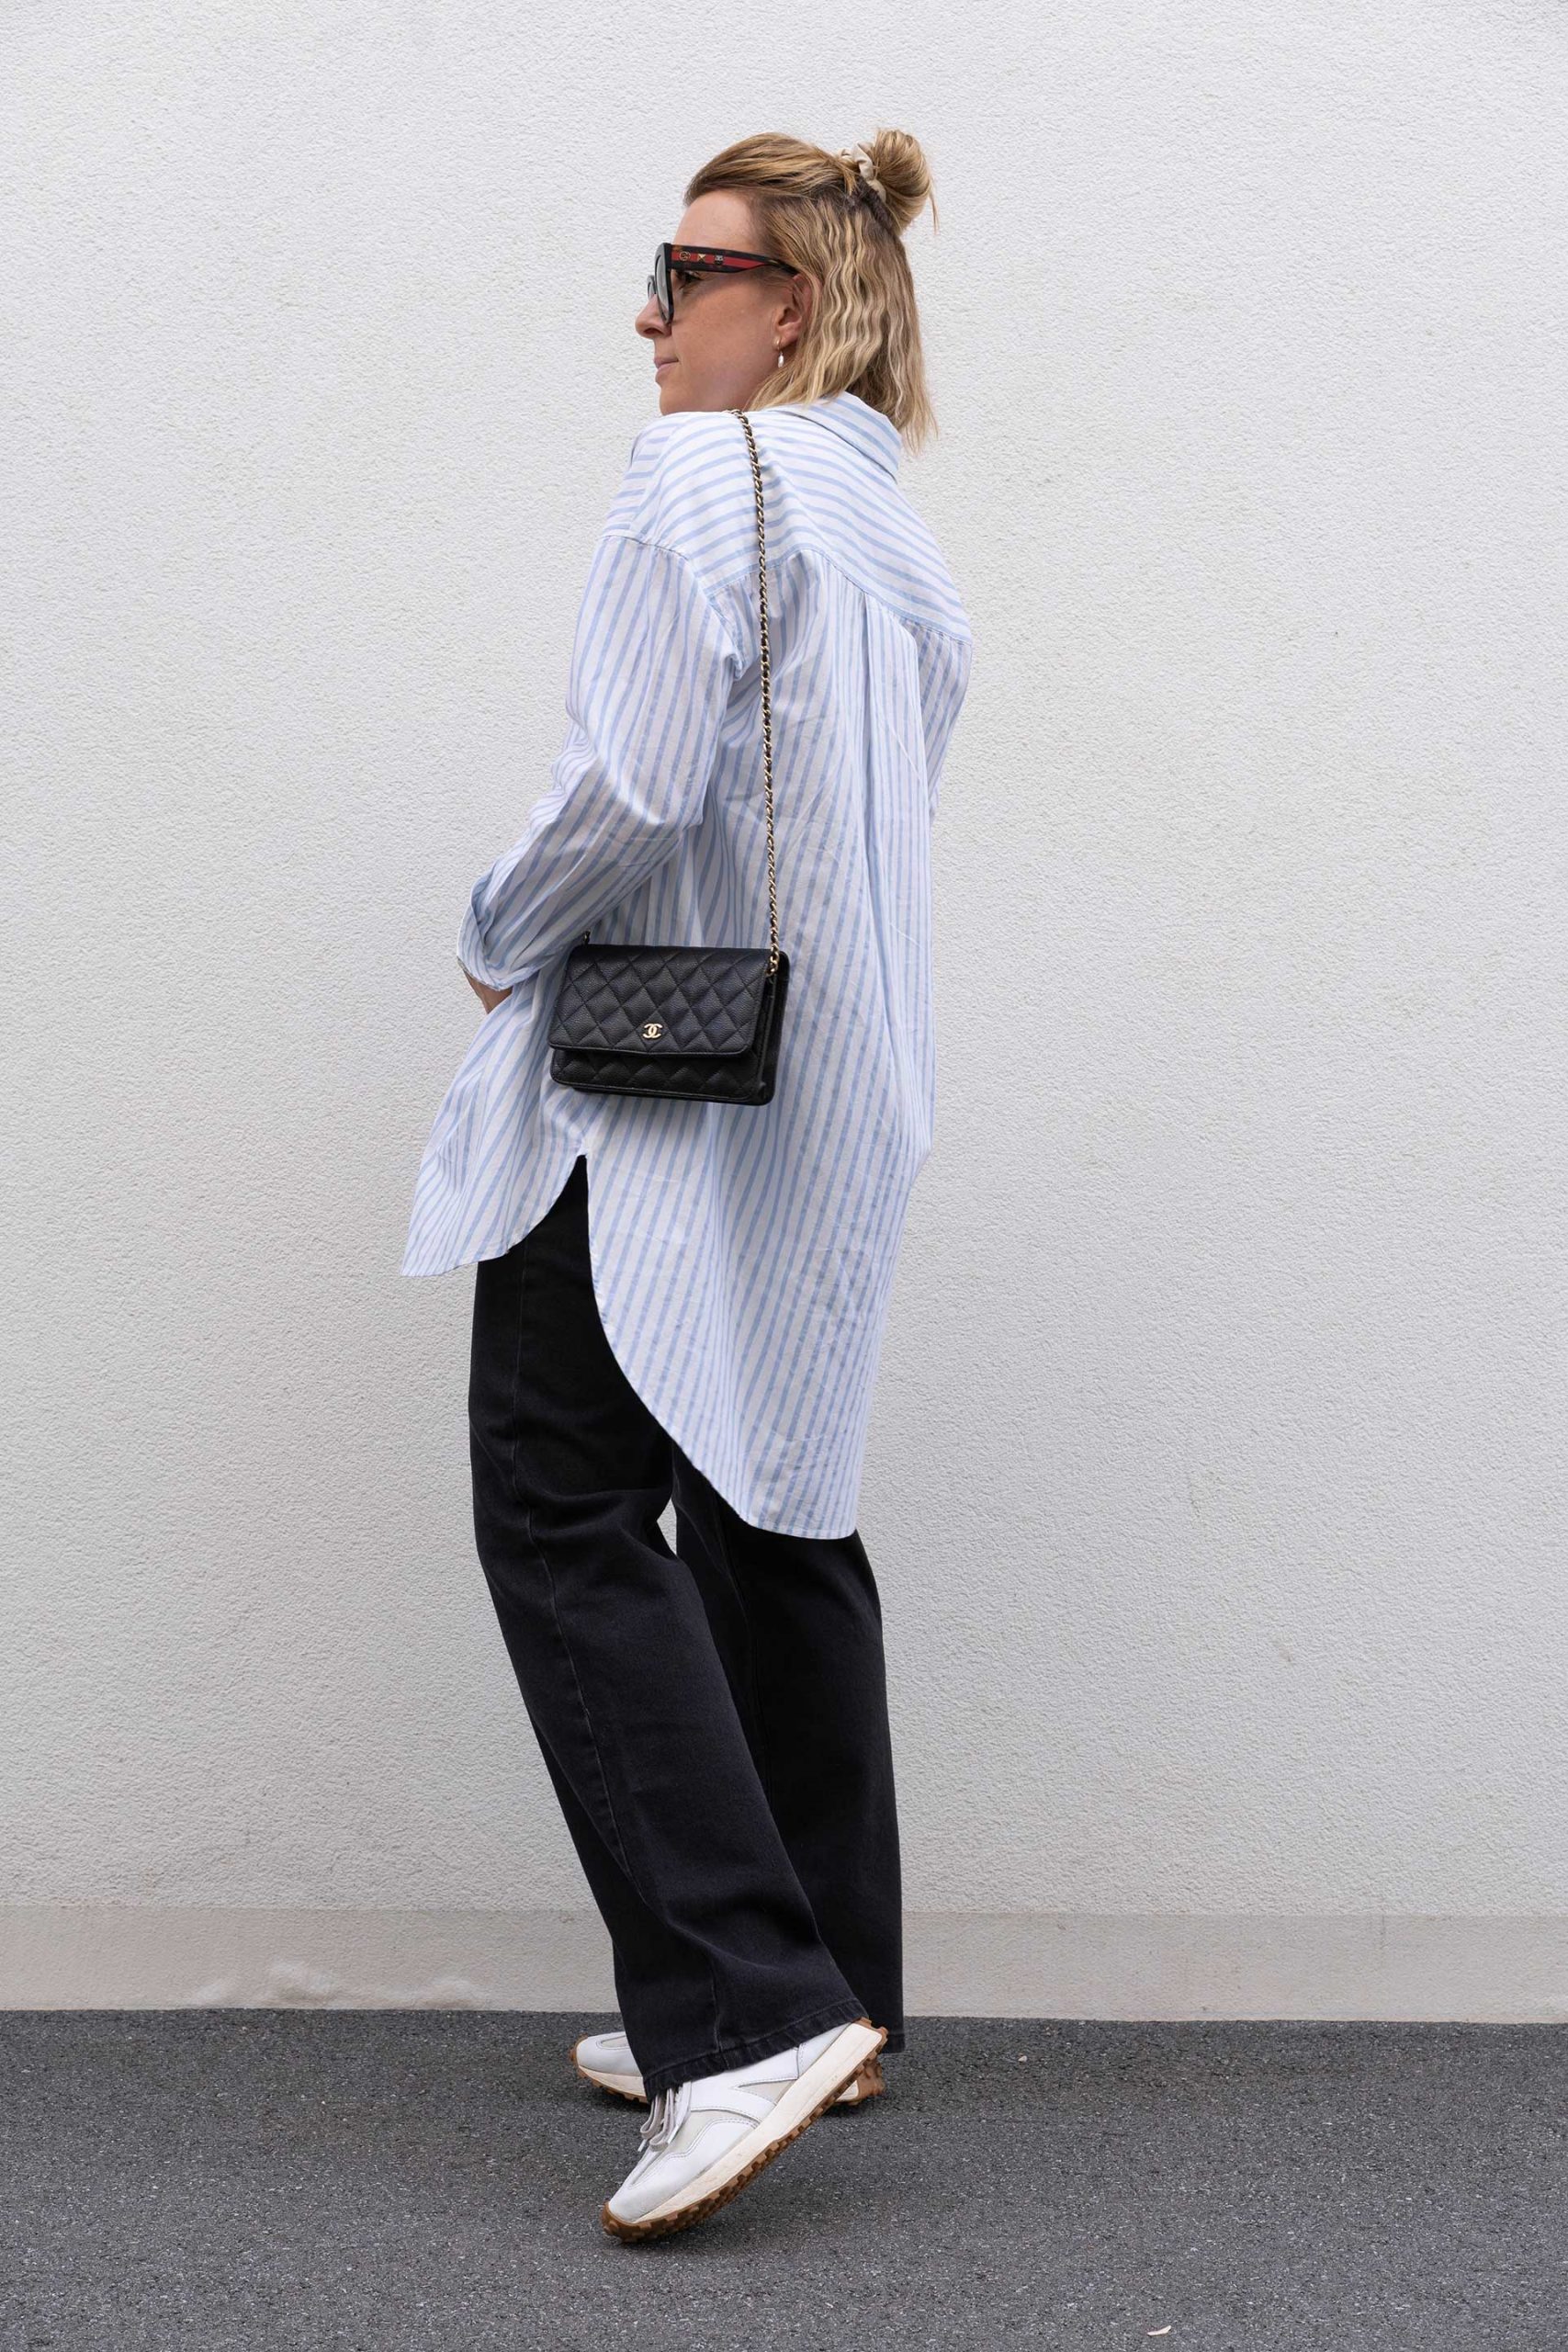 Ein Herbst Outfit mit Wide High Jeans, New Balance 327 Sneakers und oversized Bluse. www.whoismocca.com